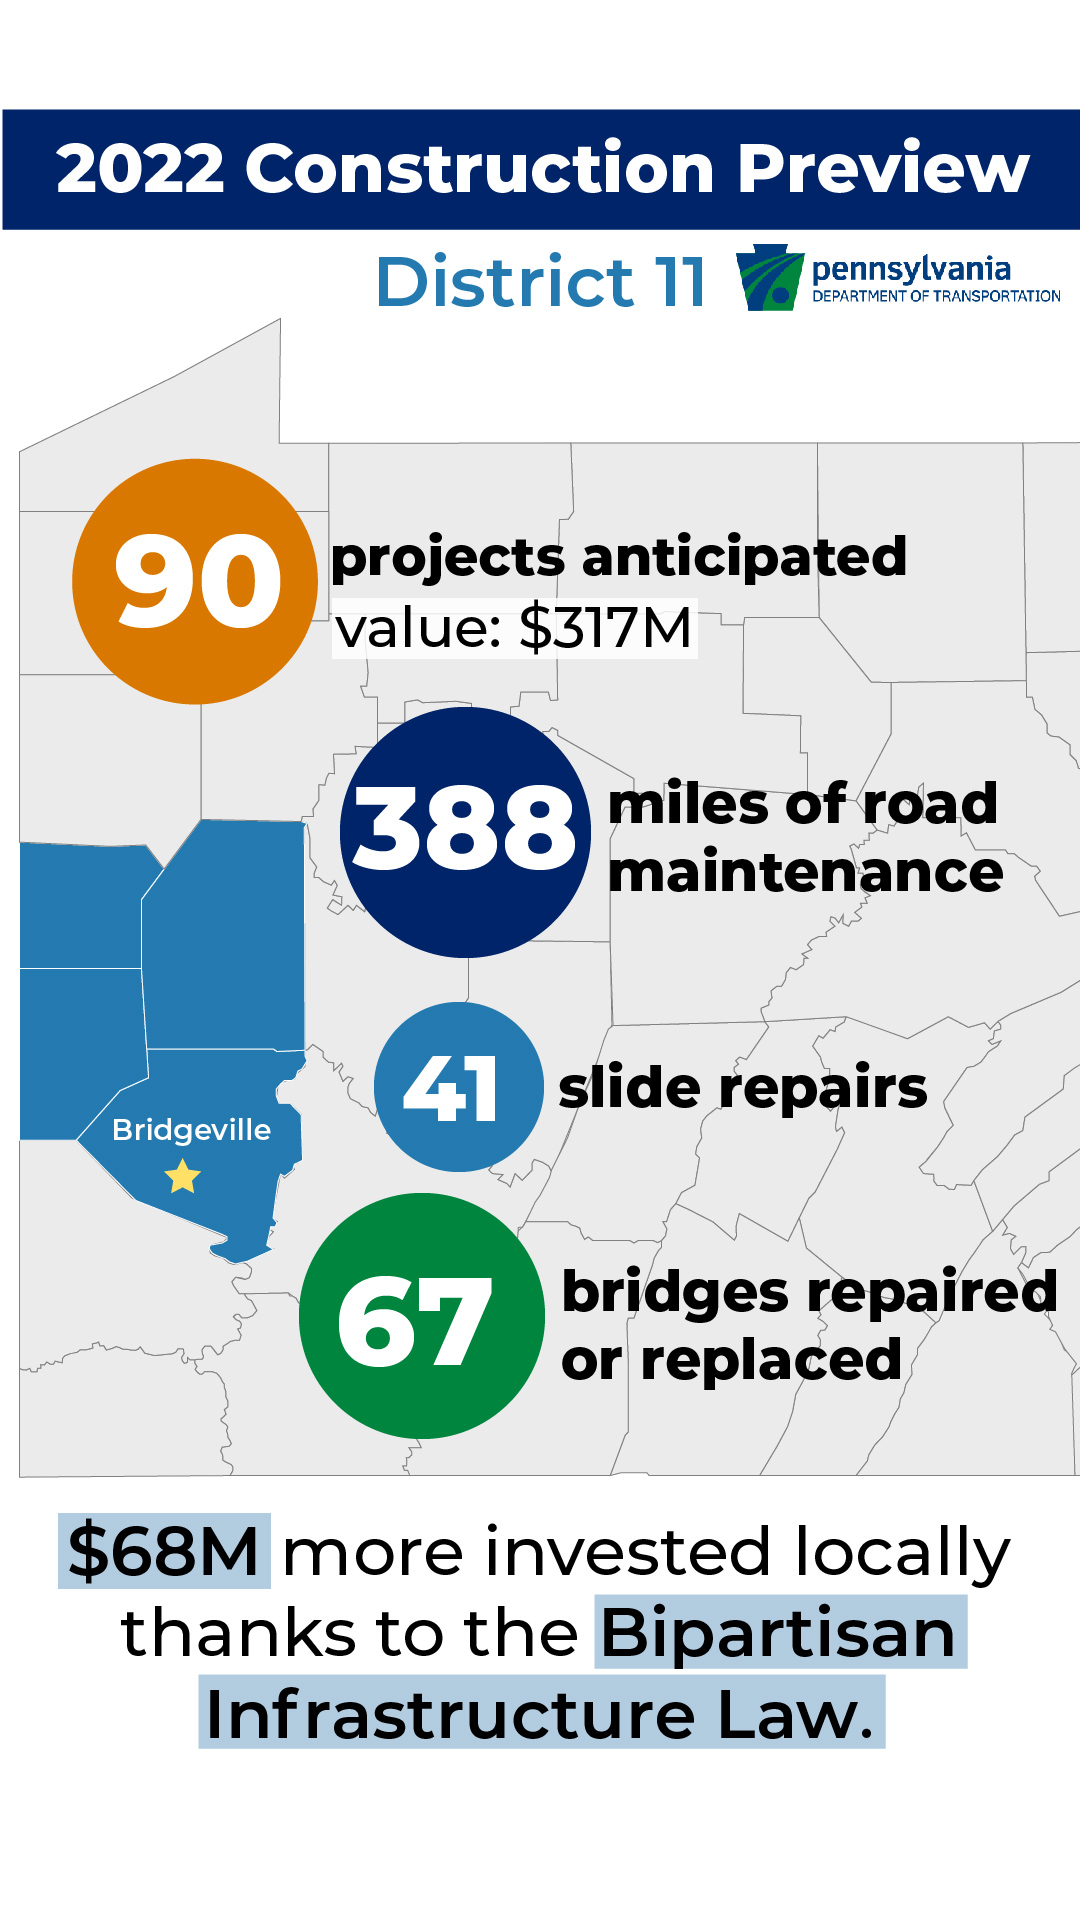 In PennDOT's District 11, we anticipate 90 projects in 2022 with a $317 million value. Also expect 388 miles of resurfacing, 41 slide repairs and 67 bridge projects. Thanks to the Bipartisan Infrastructure Law, $68 million more will be invested locally.